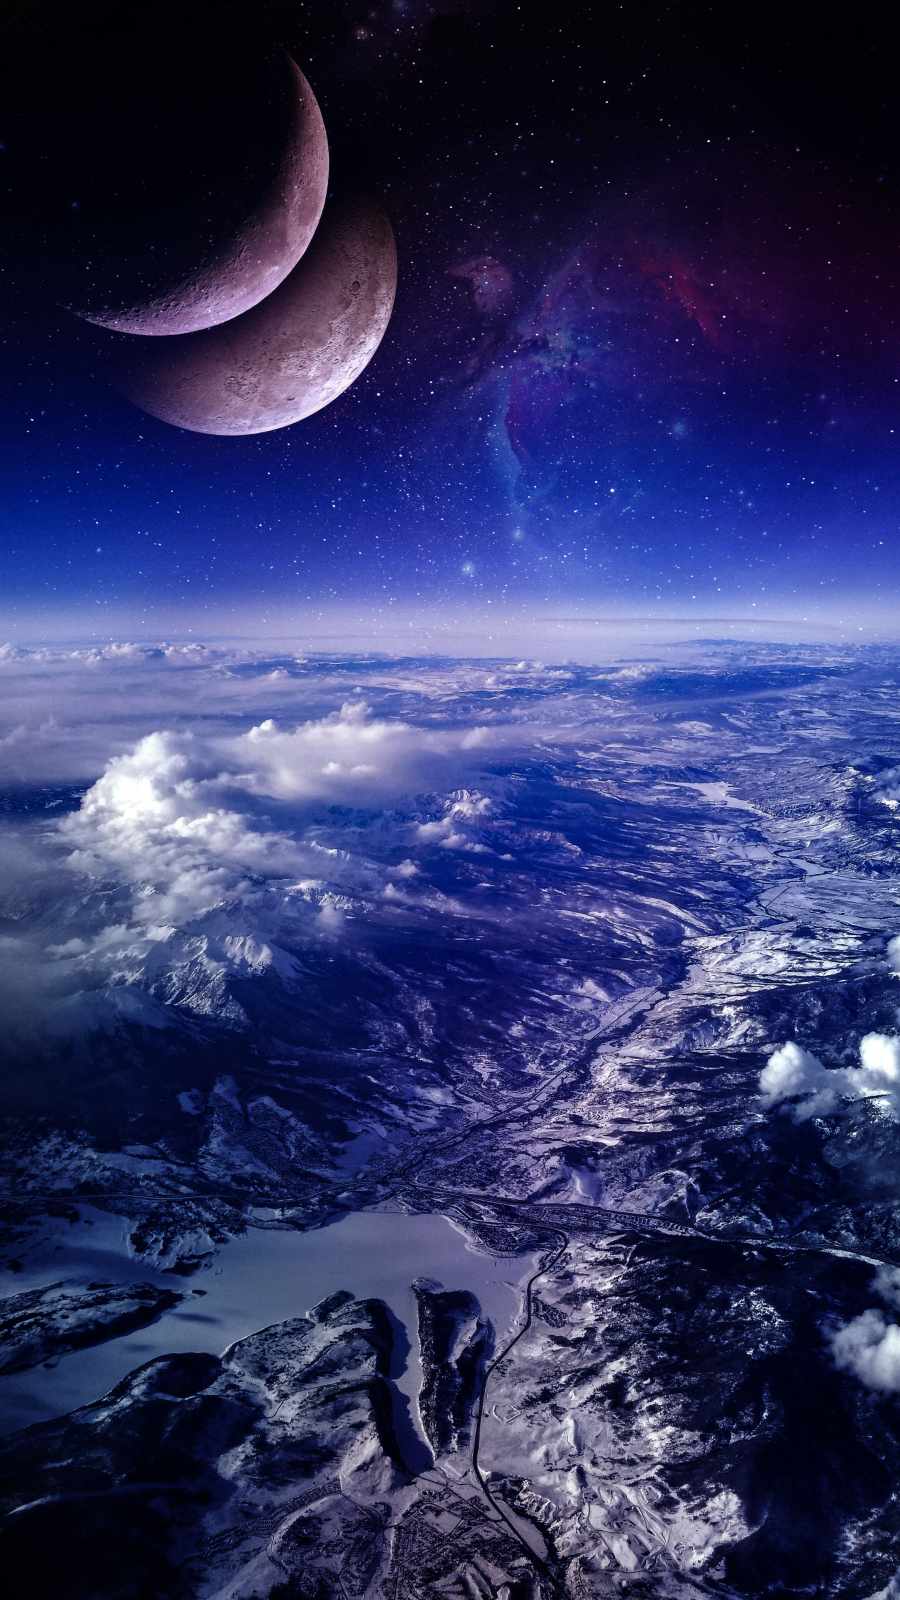 Earth Space View IPhone Wallpaper - IPhone Wallpapers : iPhone Wallpapers